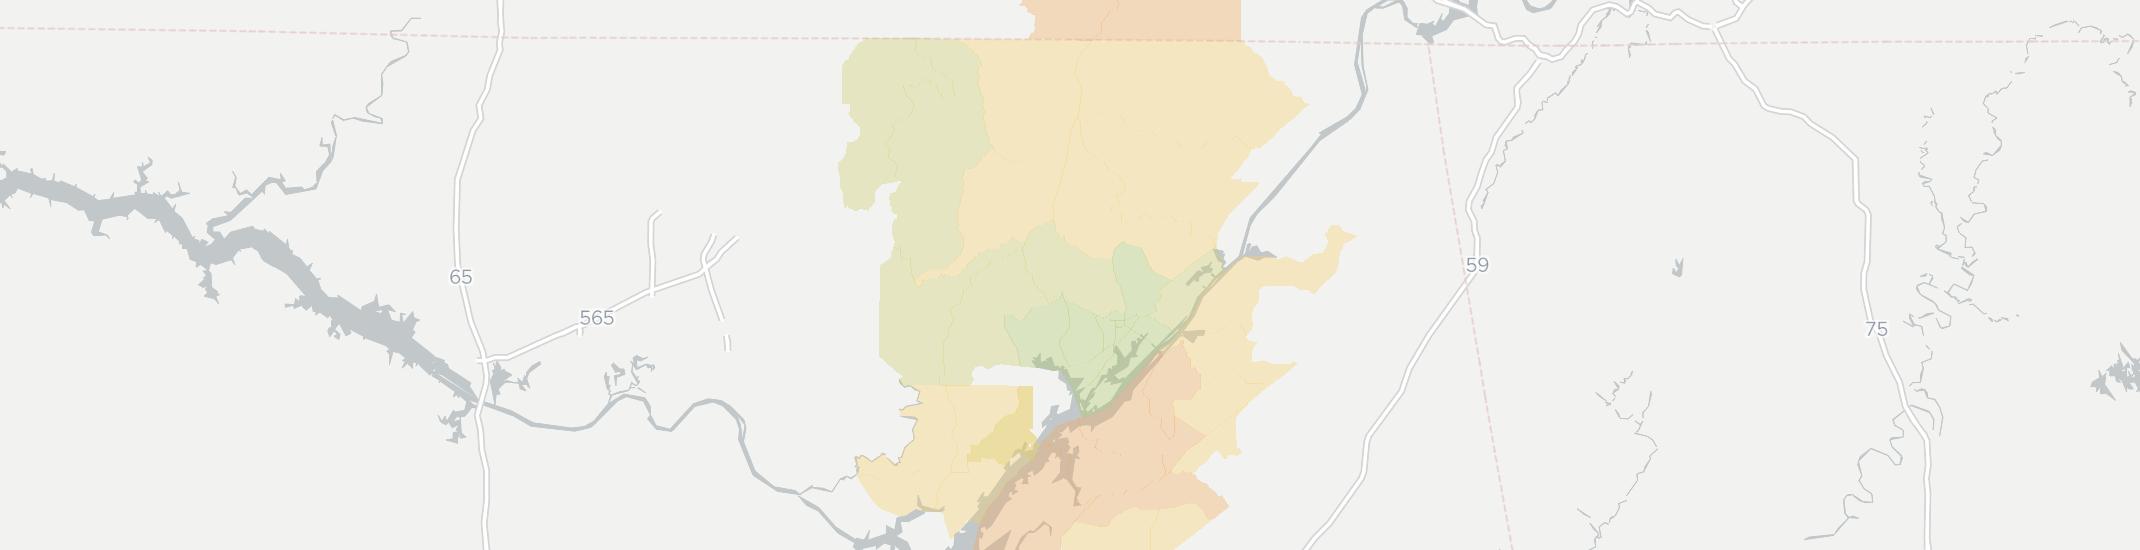 Scottsboro Internet Competition Map. Click for interactive map.